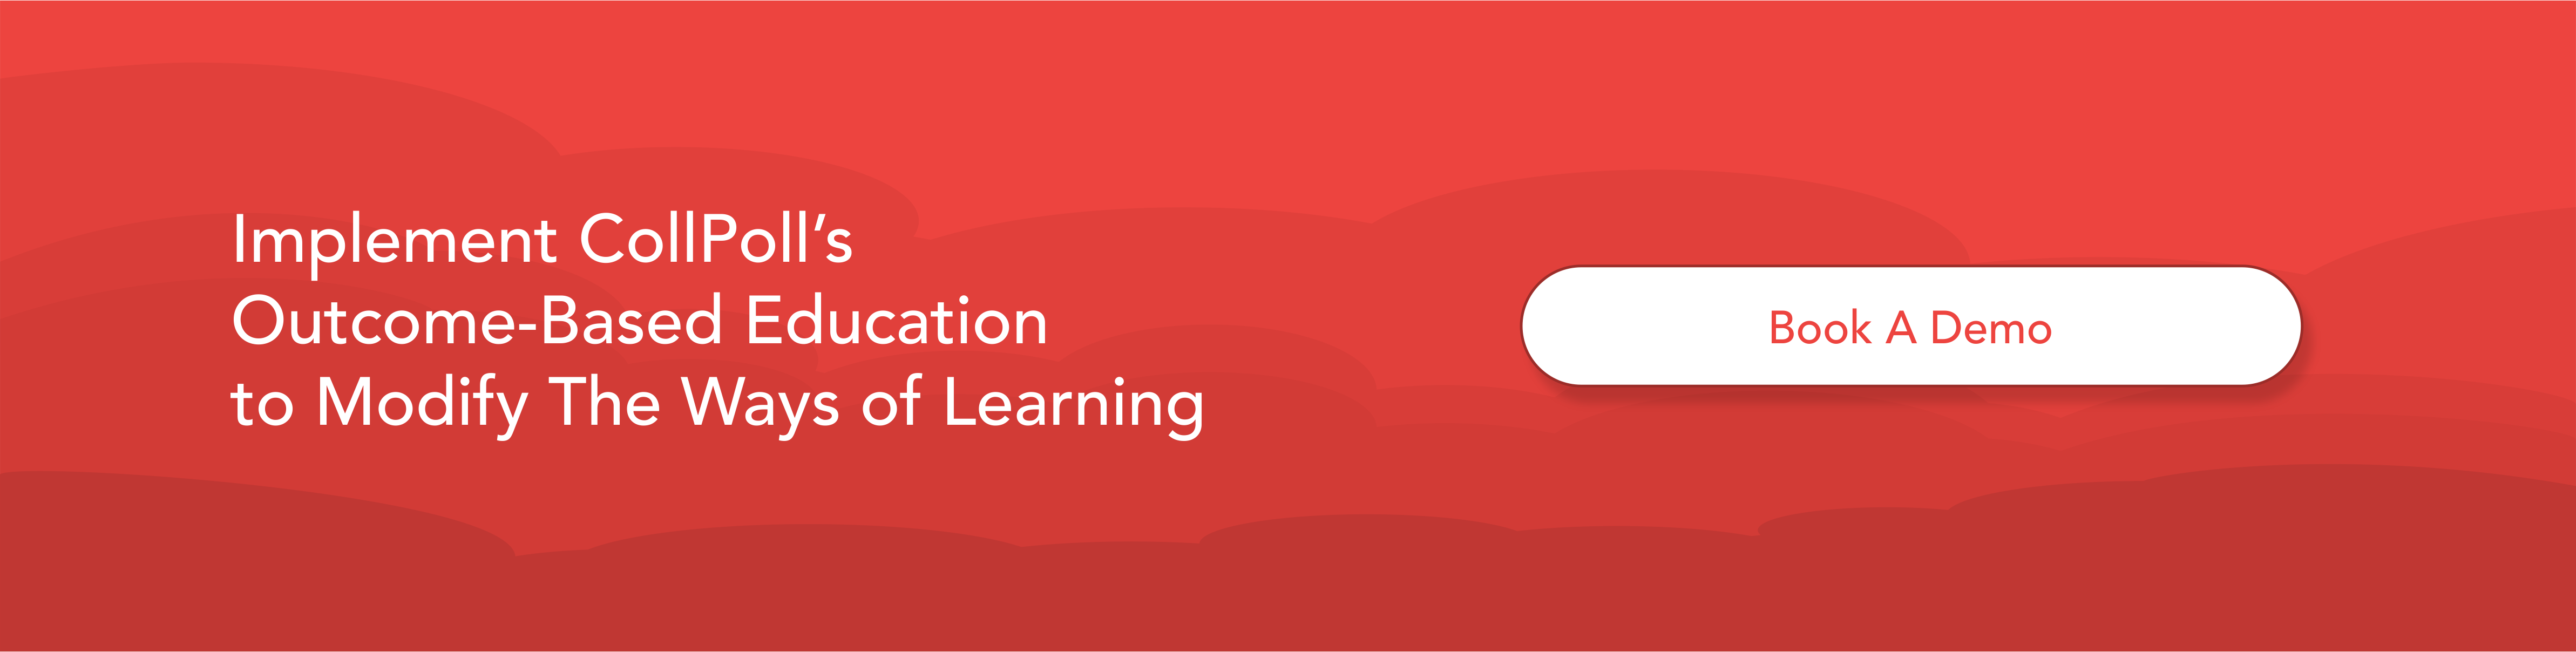 Implement CollPoll’s Outcome-Based Education to Modify The Ways of Learning